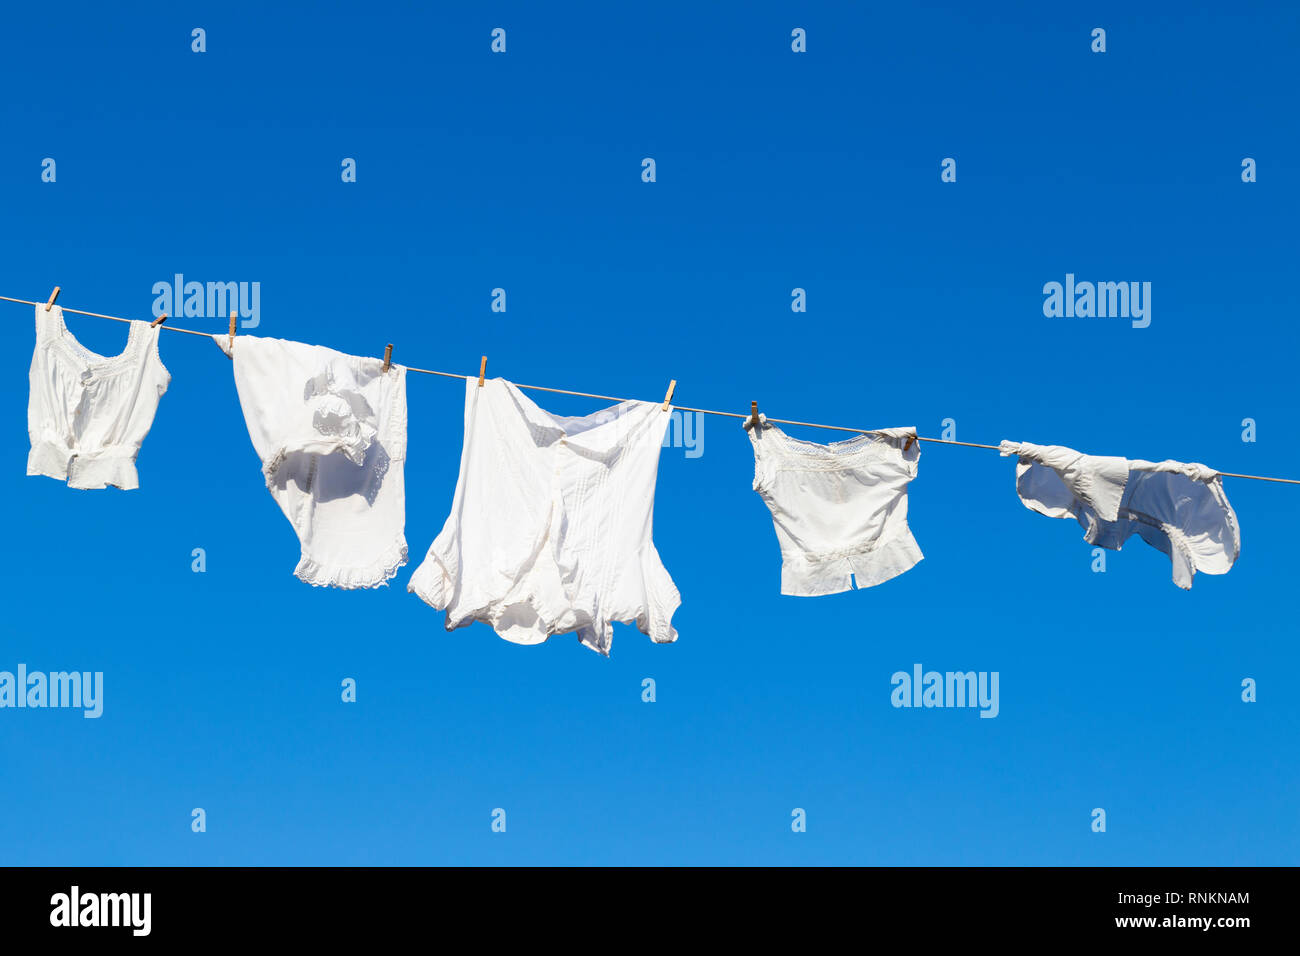 Clean white laundry hanging to dry on a rope against the blue sky during a beautiful sunny day Stock Photo